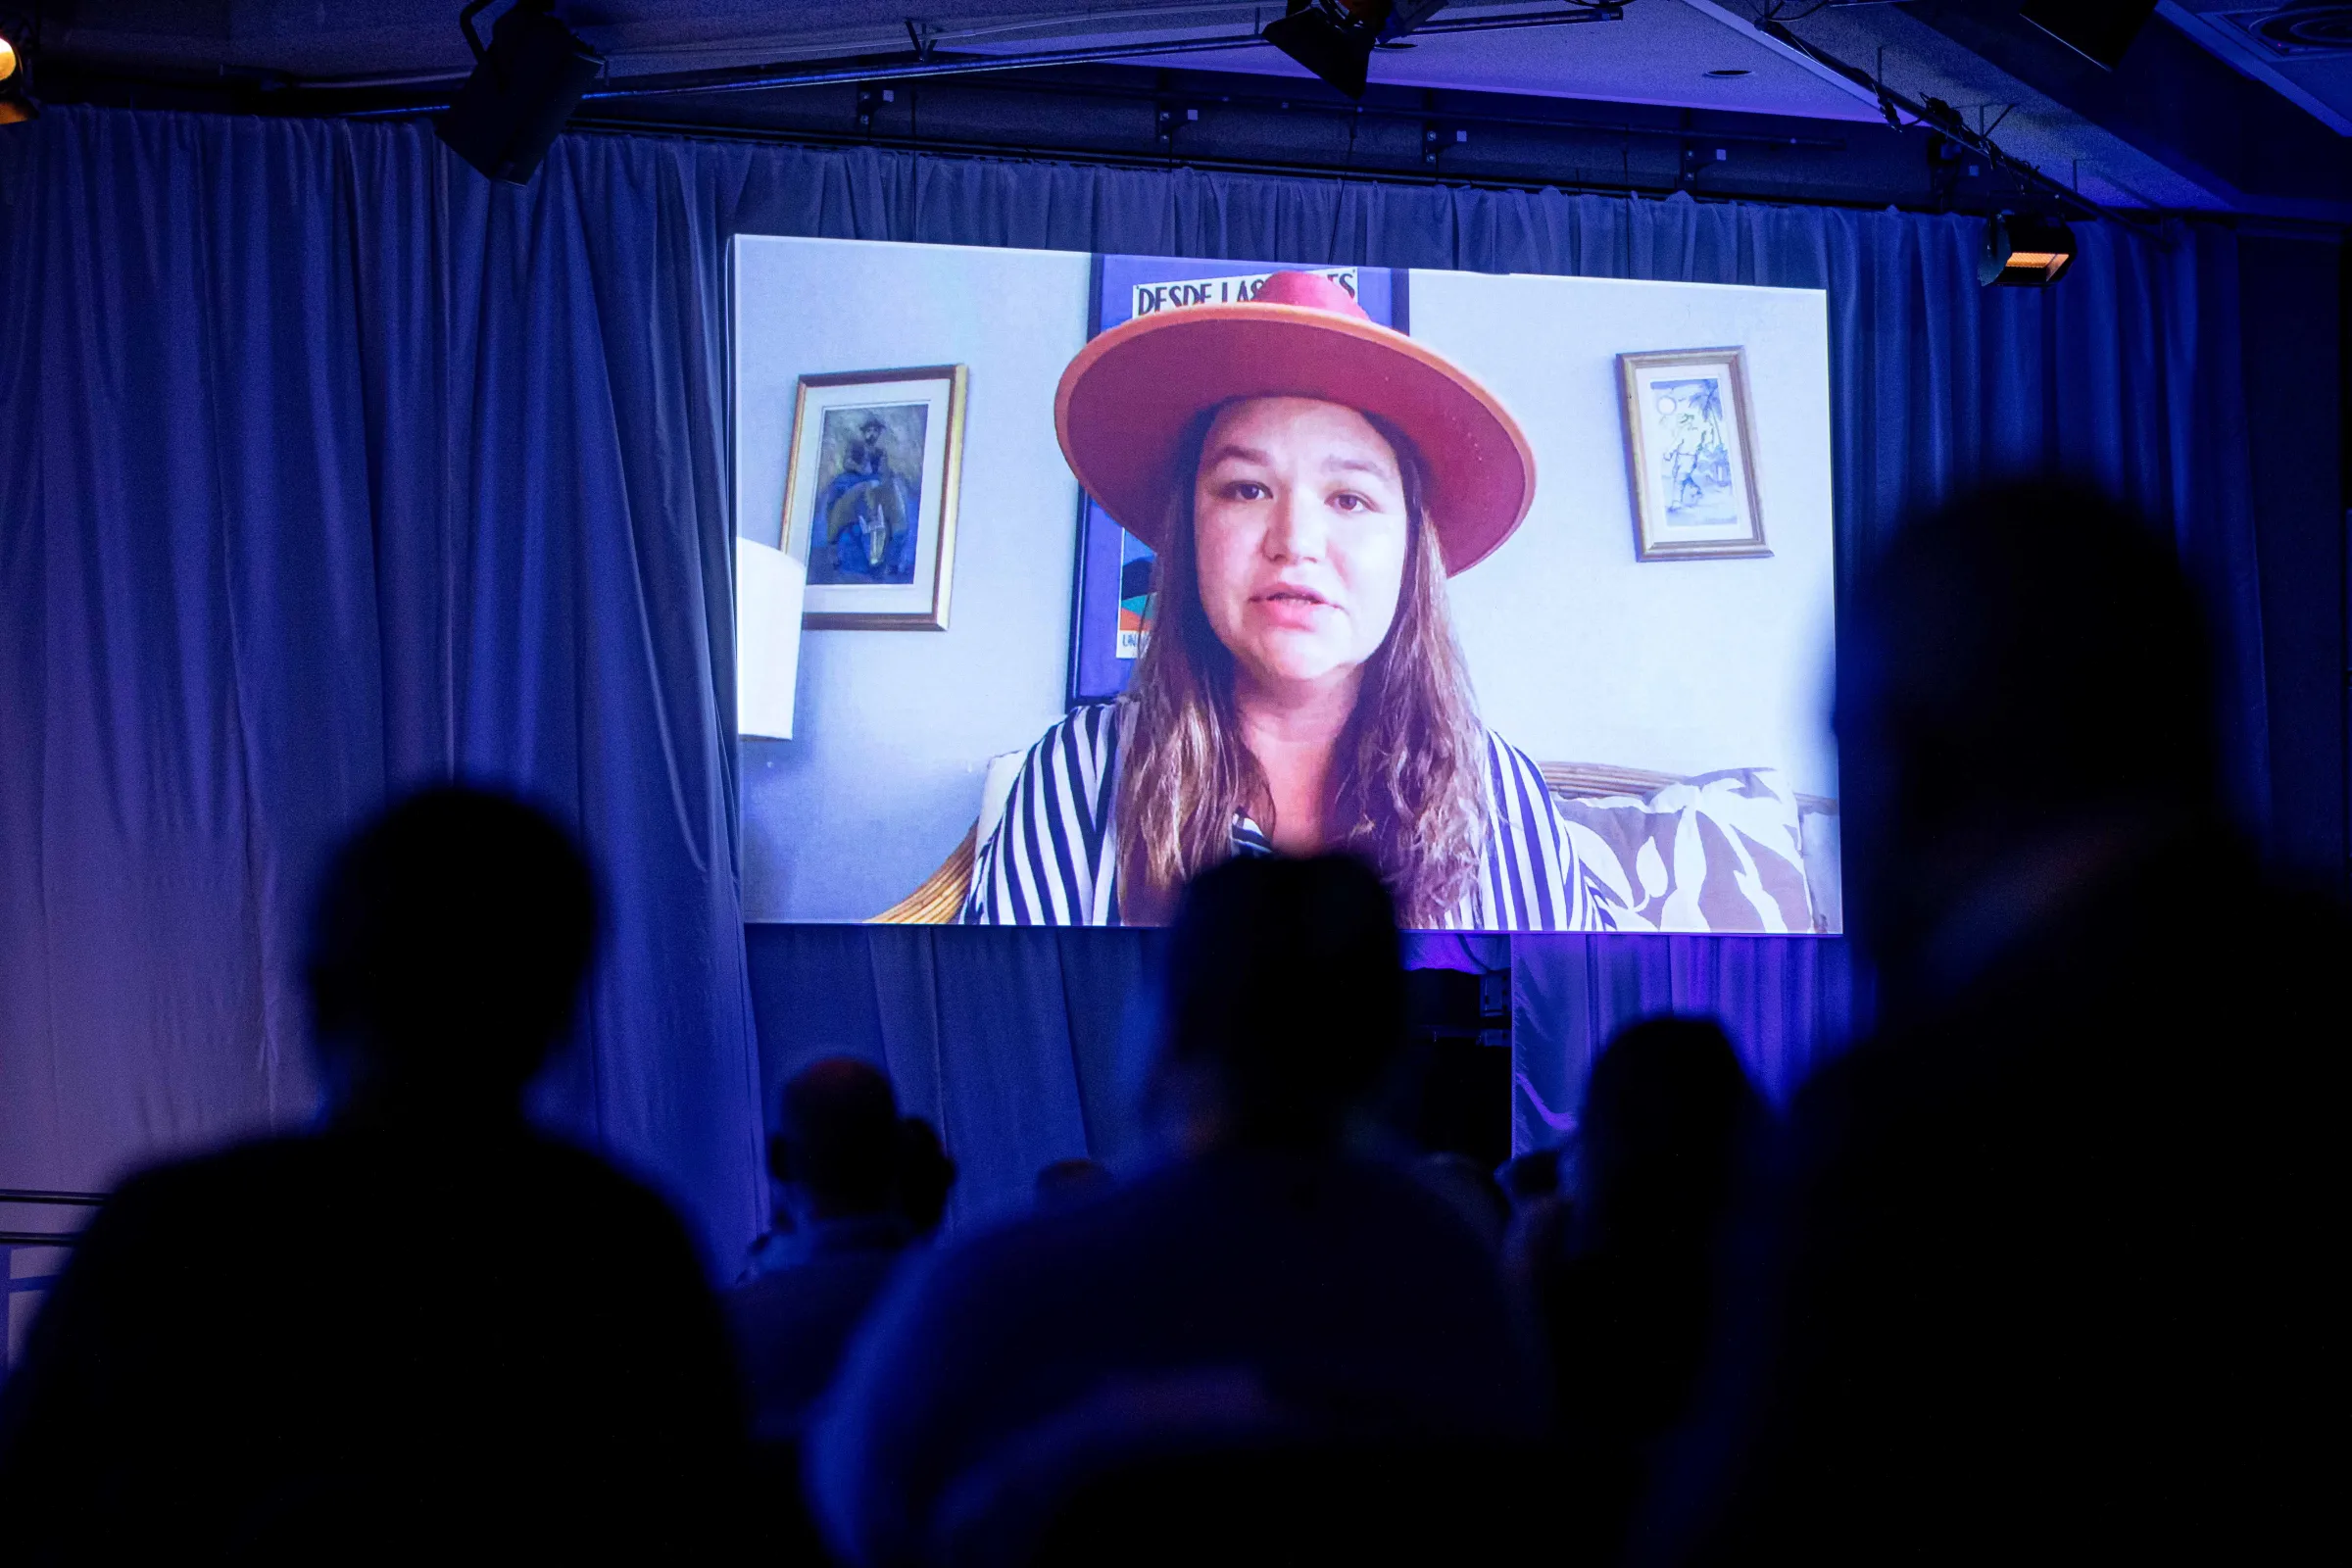 Brittany Kaiser, co-founder of the Own Your Data Foundation, speaks via videocall during a panel at the 2022 Trust Conference, London, 26 October 2022. Thomson Reuters Foundation/Ed Telling